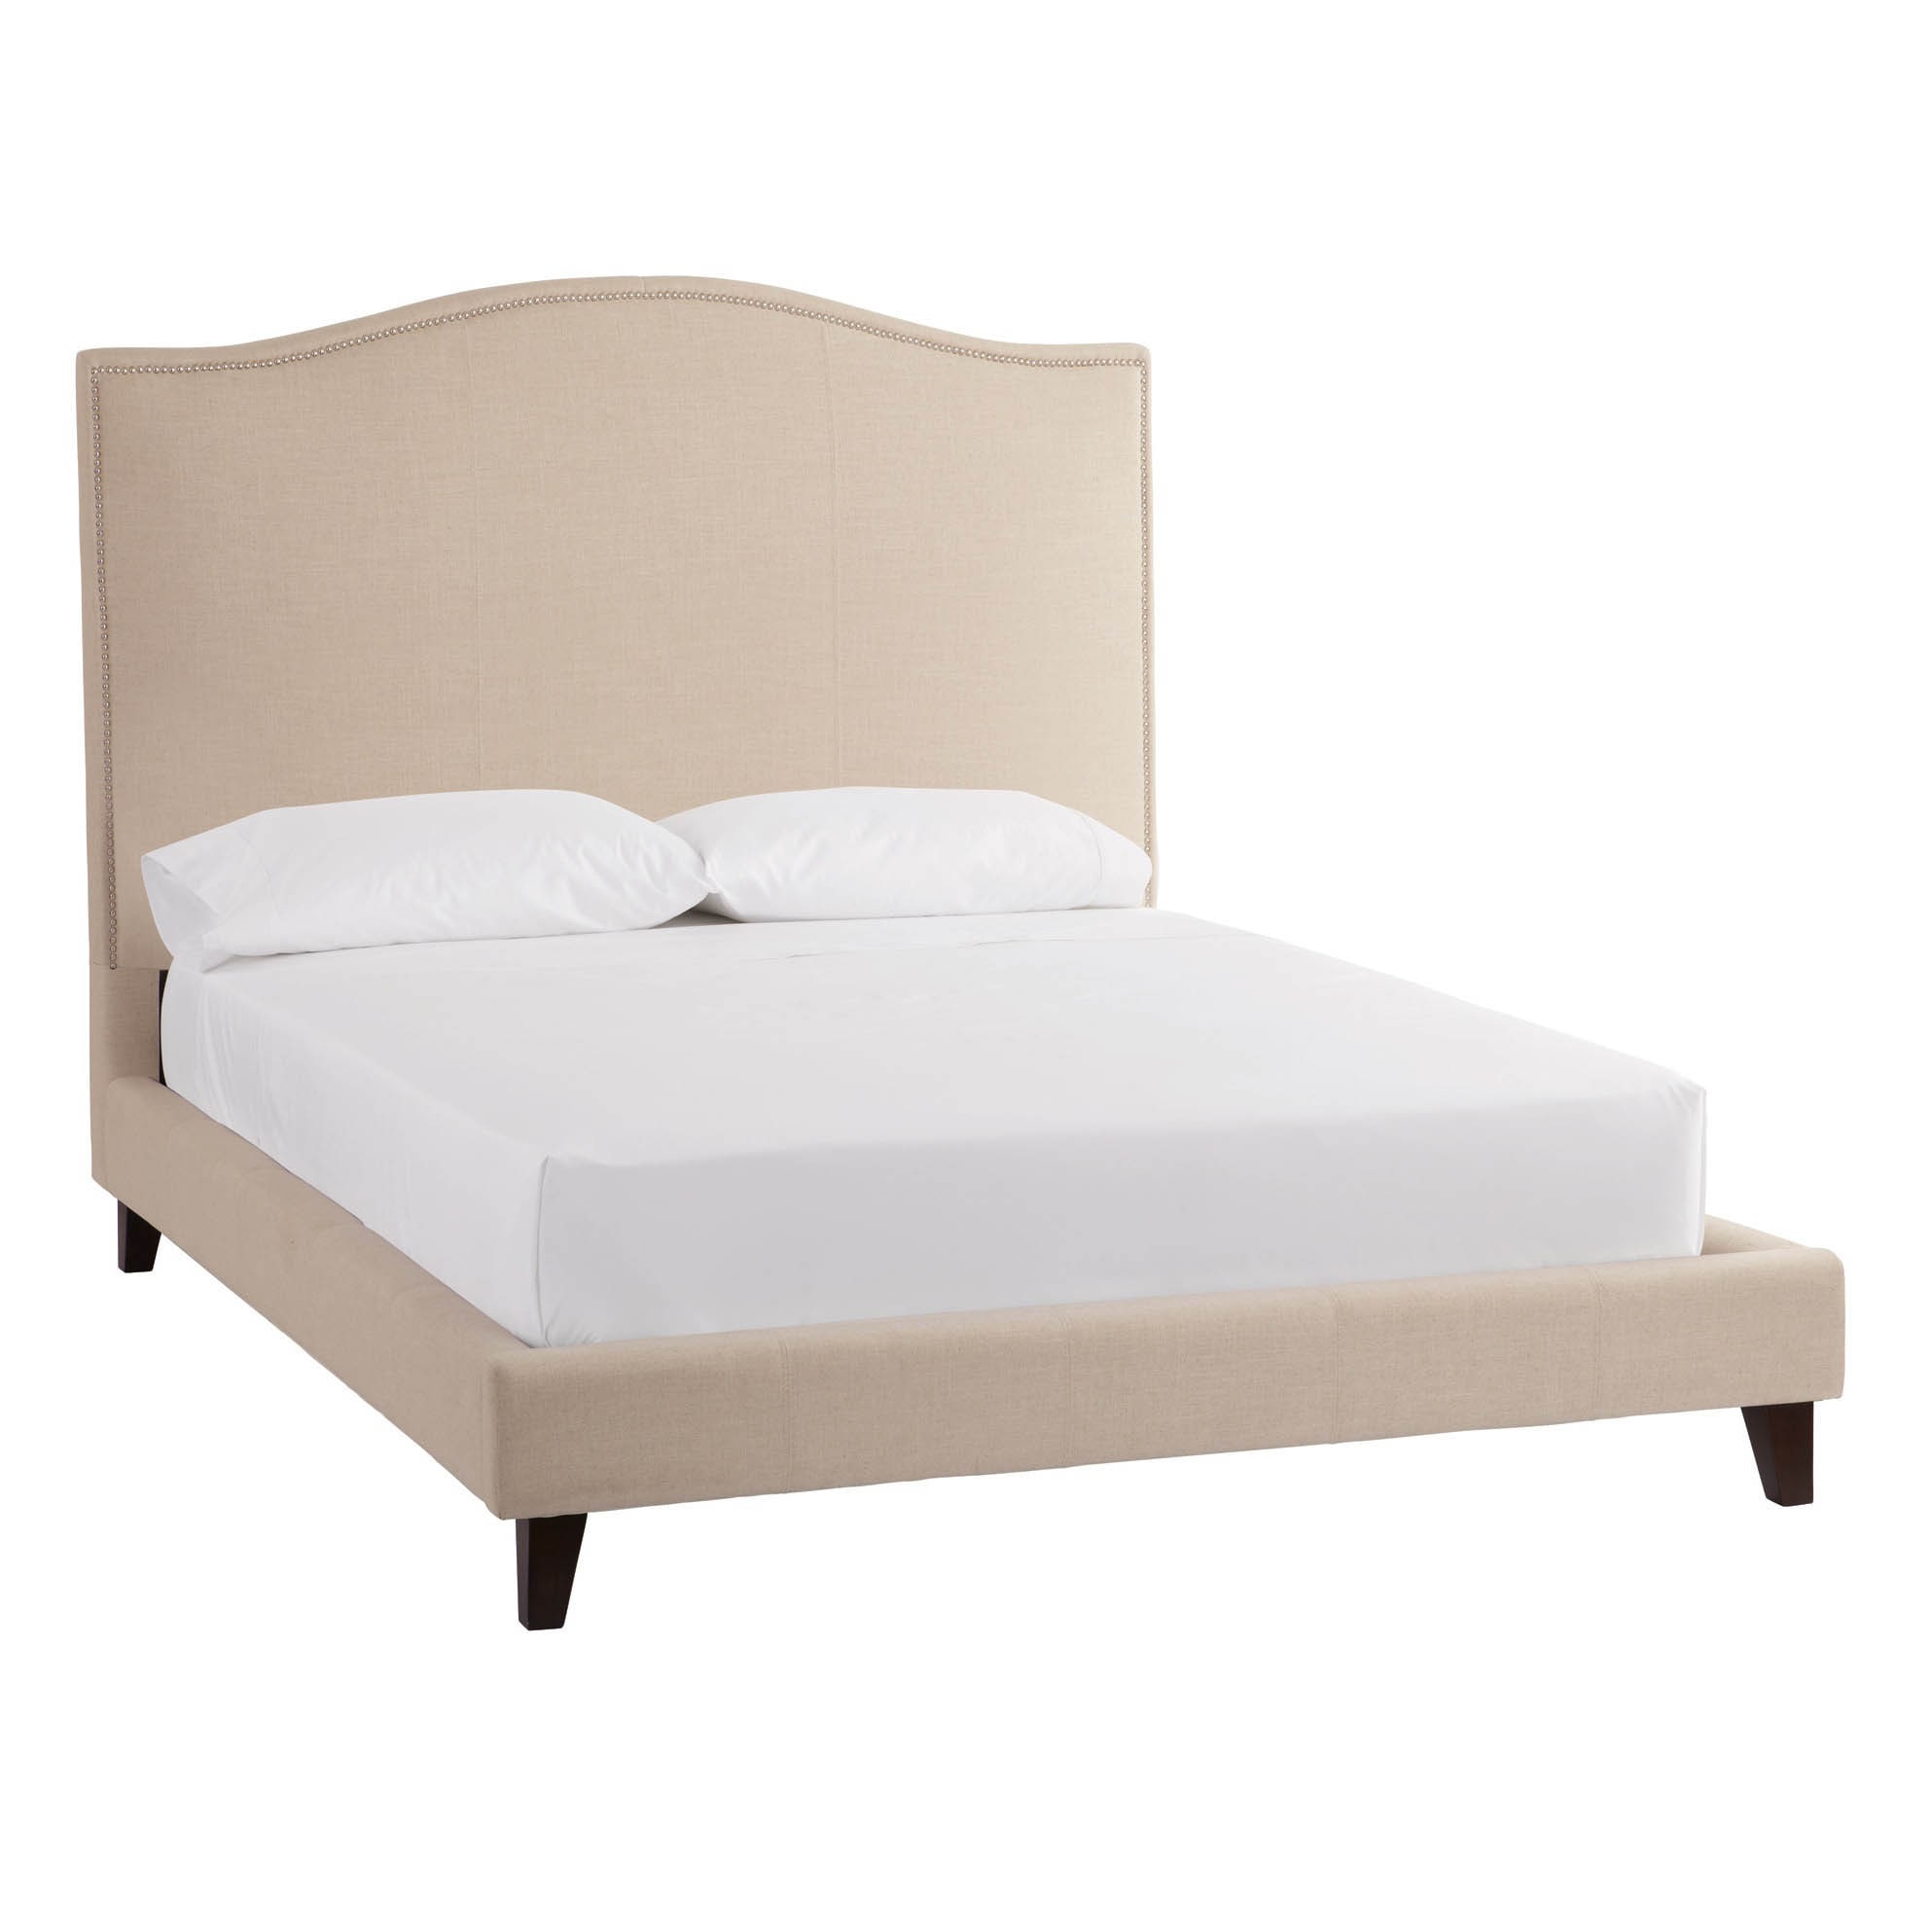 Sunpan Patagonia Queen size Linen Upholstered Bed Off White Size Queen